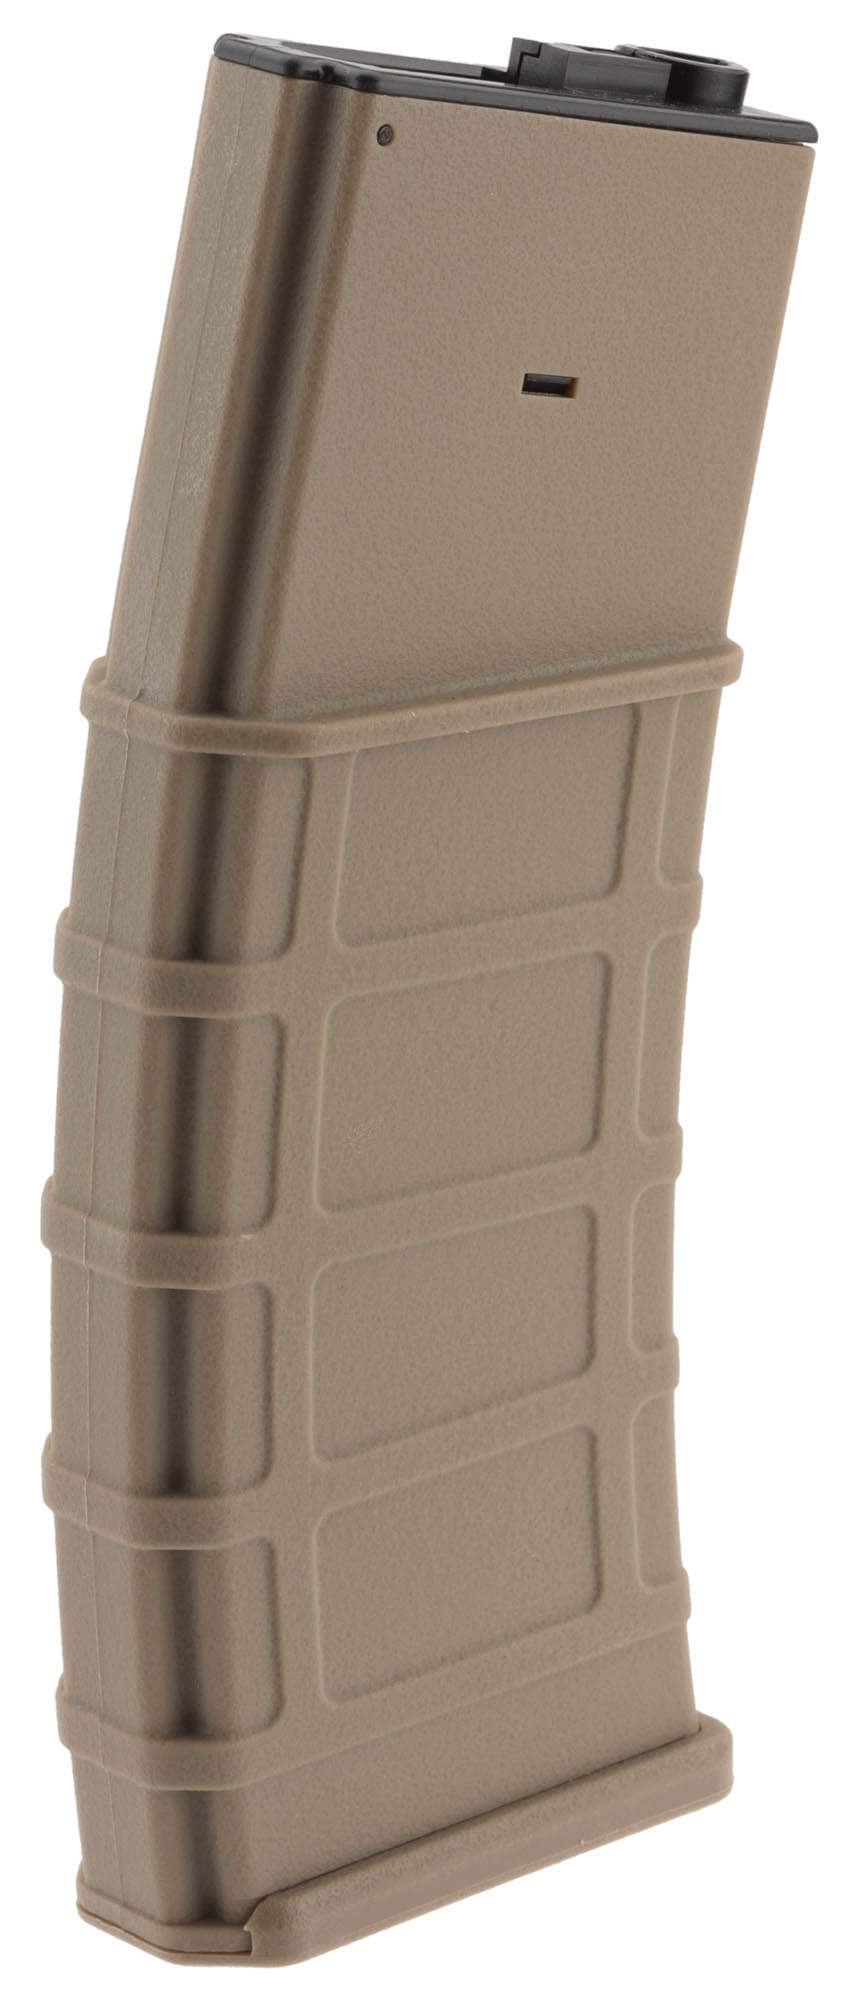 Photo Airsoft Magazine Polymer Flash Hi Cap 360 rds for M4-M16 (made by Lonex) - Tan